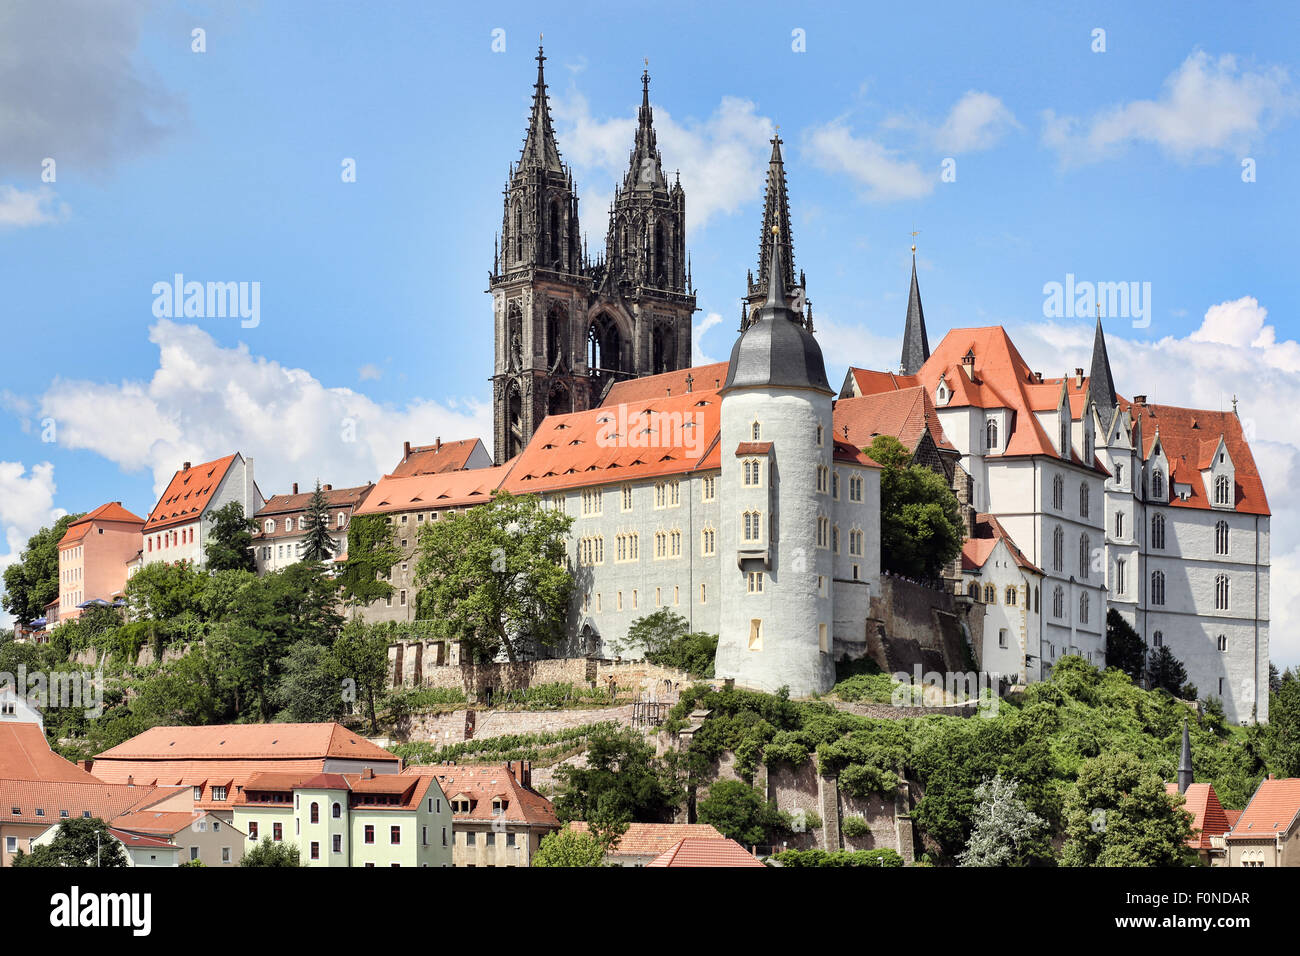 Castle hill with Albrechtsburg and Cathedral, Meissen district, Saxony, Germany Stock Photo